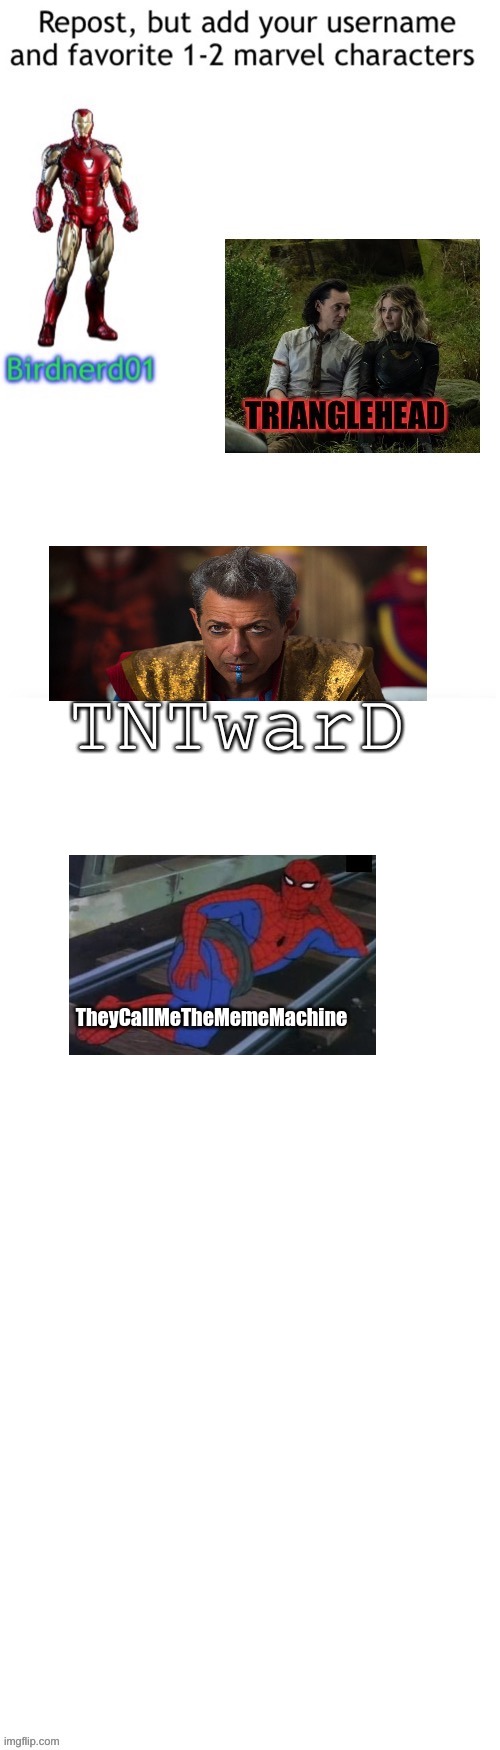 mine is spiderman | TheyCallMeTheMemeMachine | image tagged in memes,funny,marvel,repost | made w/ Imgflip meme maker